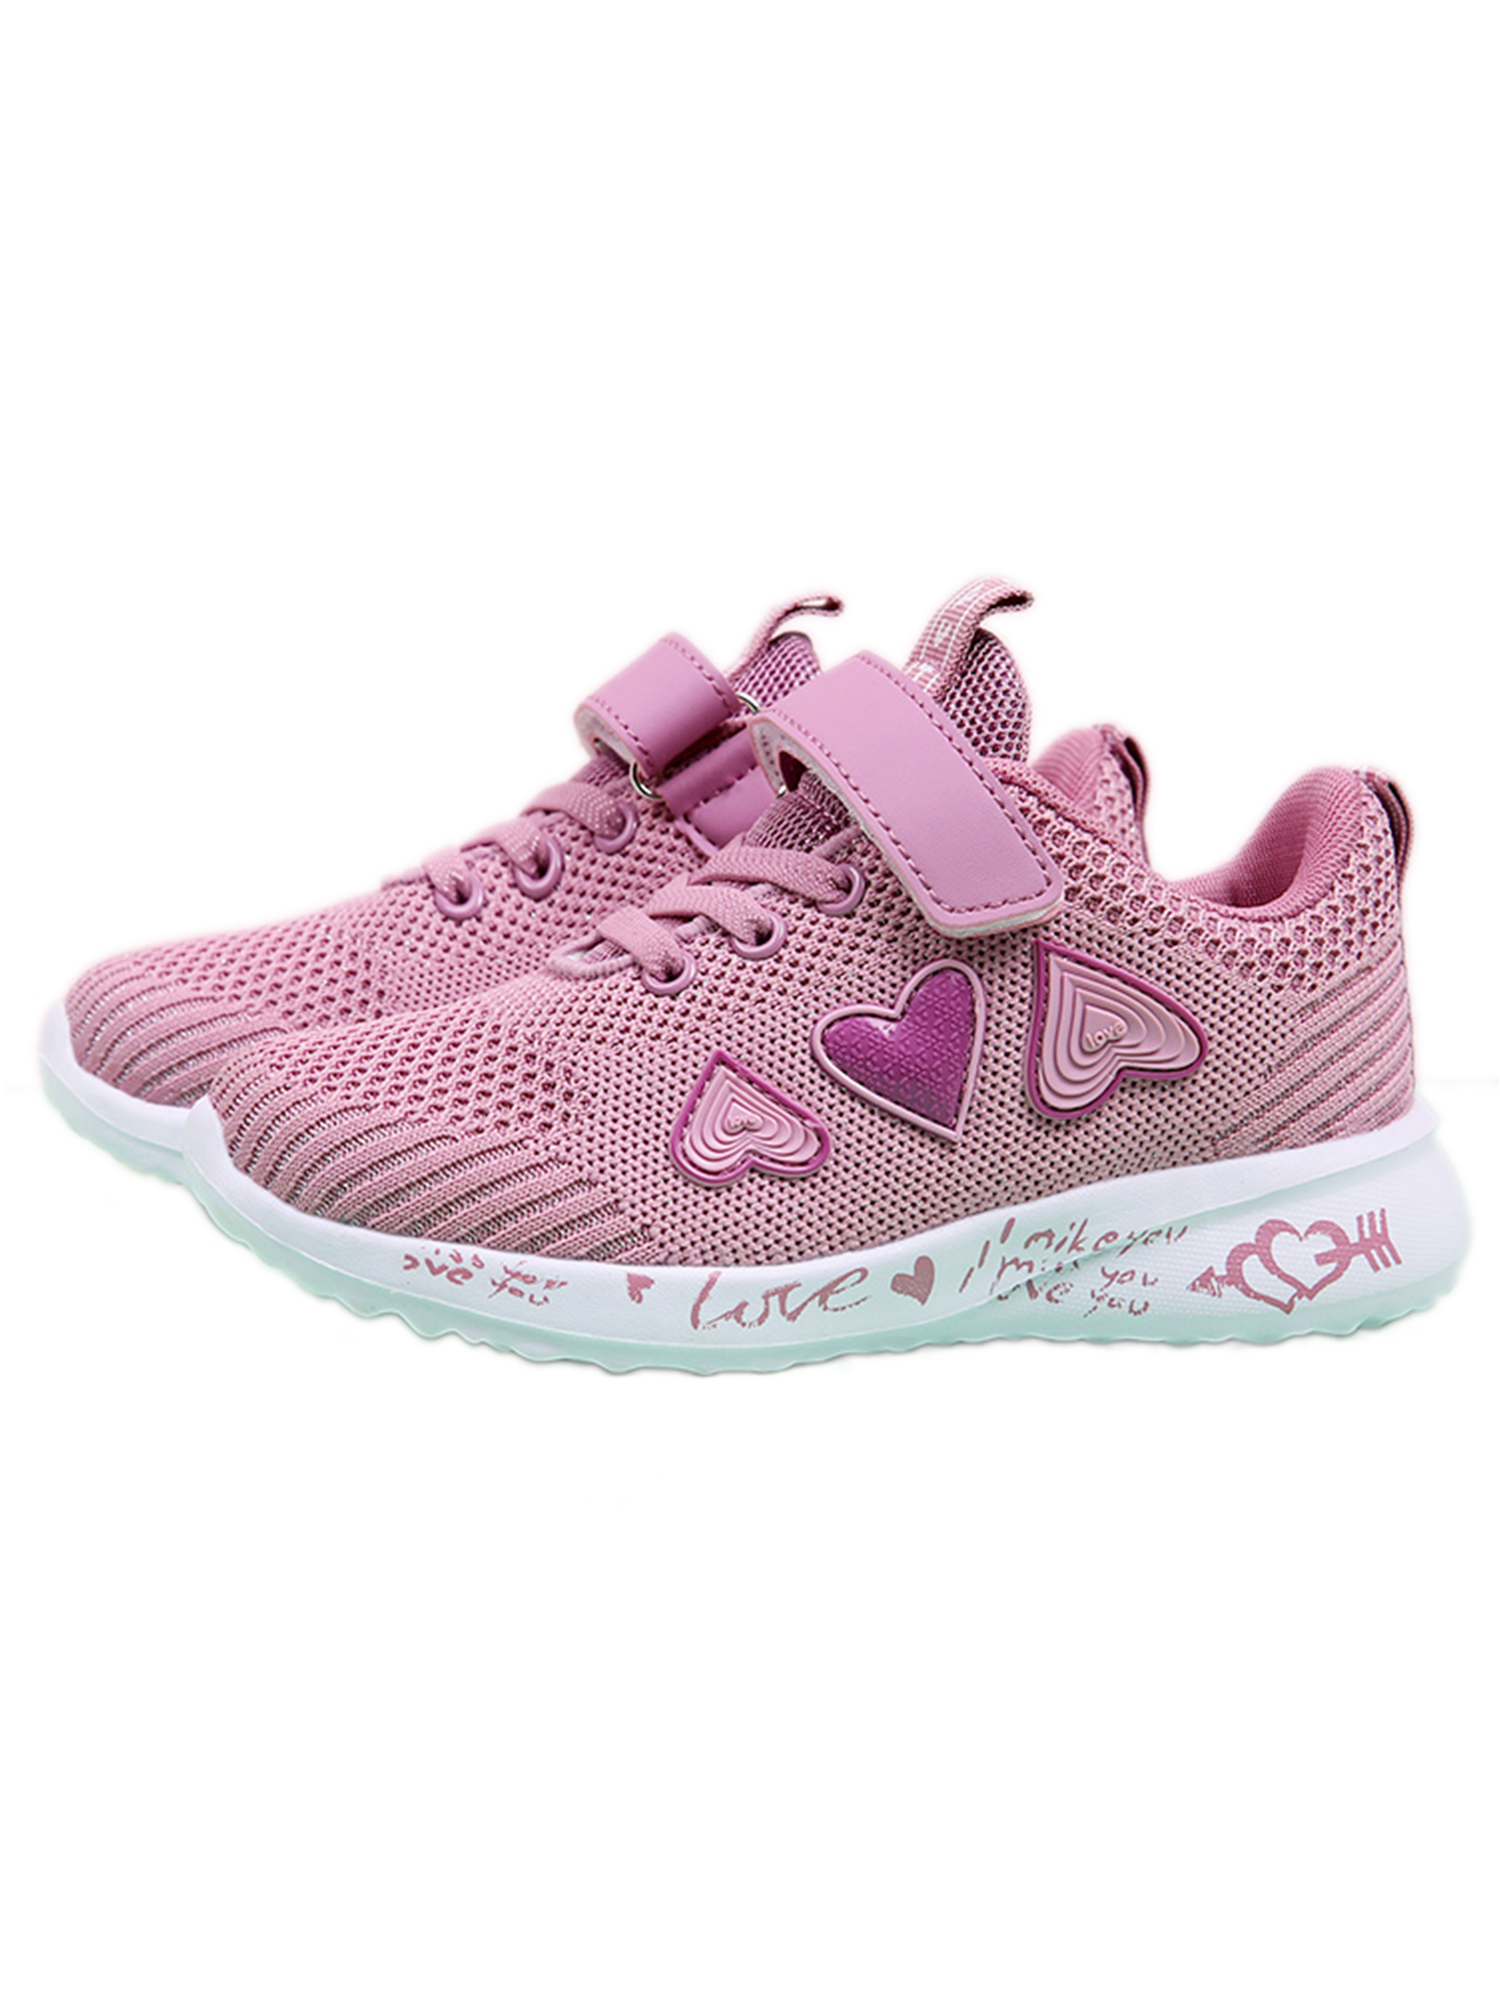 Tanleewa Lovely Girls Sports Shoes Kids Breathable Sneakers Lightweight Casual Shoe Size 10 - image 5 of 7